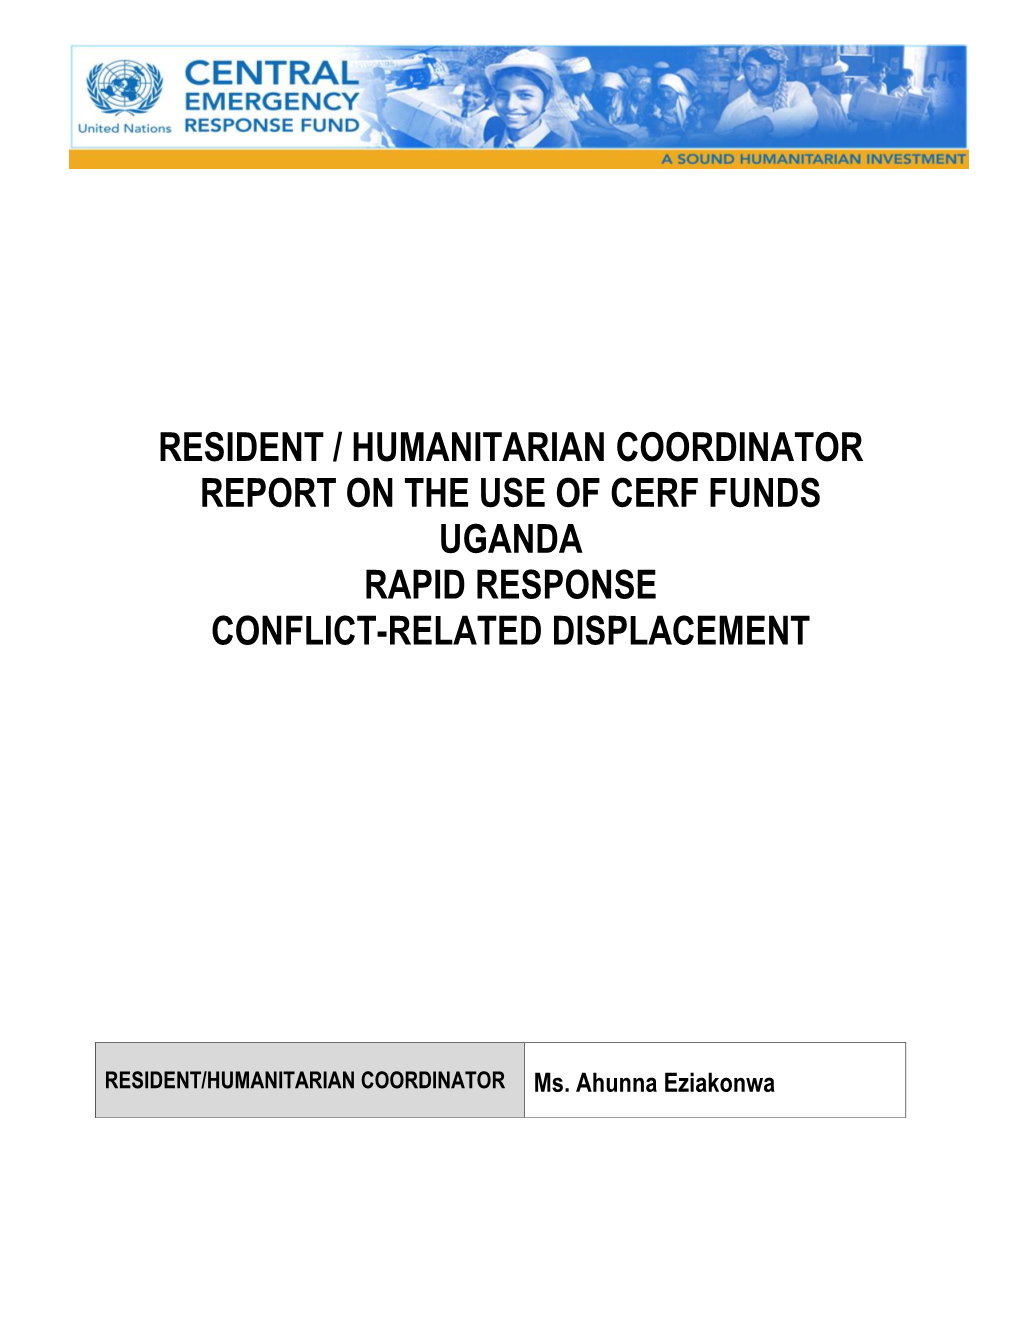 Resident / Humanitarian Coordinator Report on the Use of Cerf Funds Uganda Rapid Response Conflict-Related Displacement